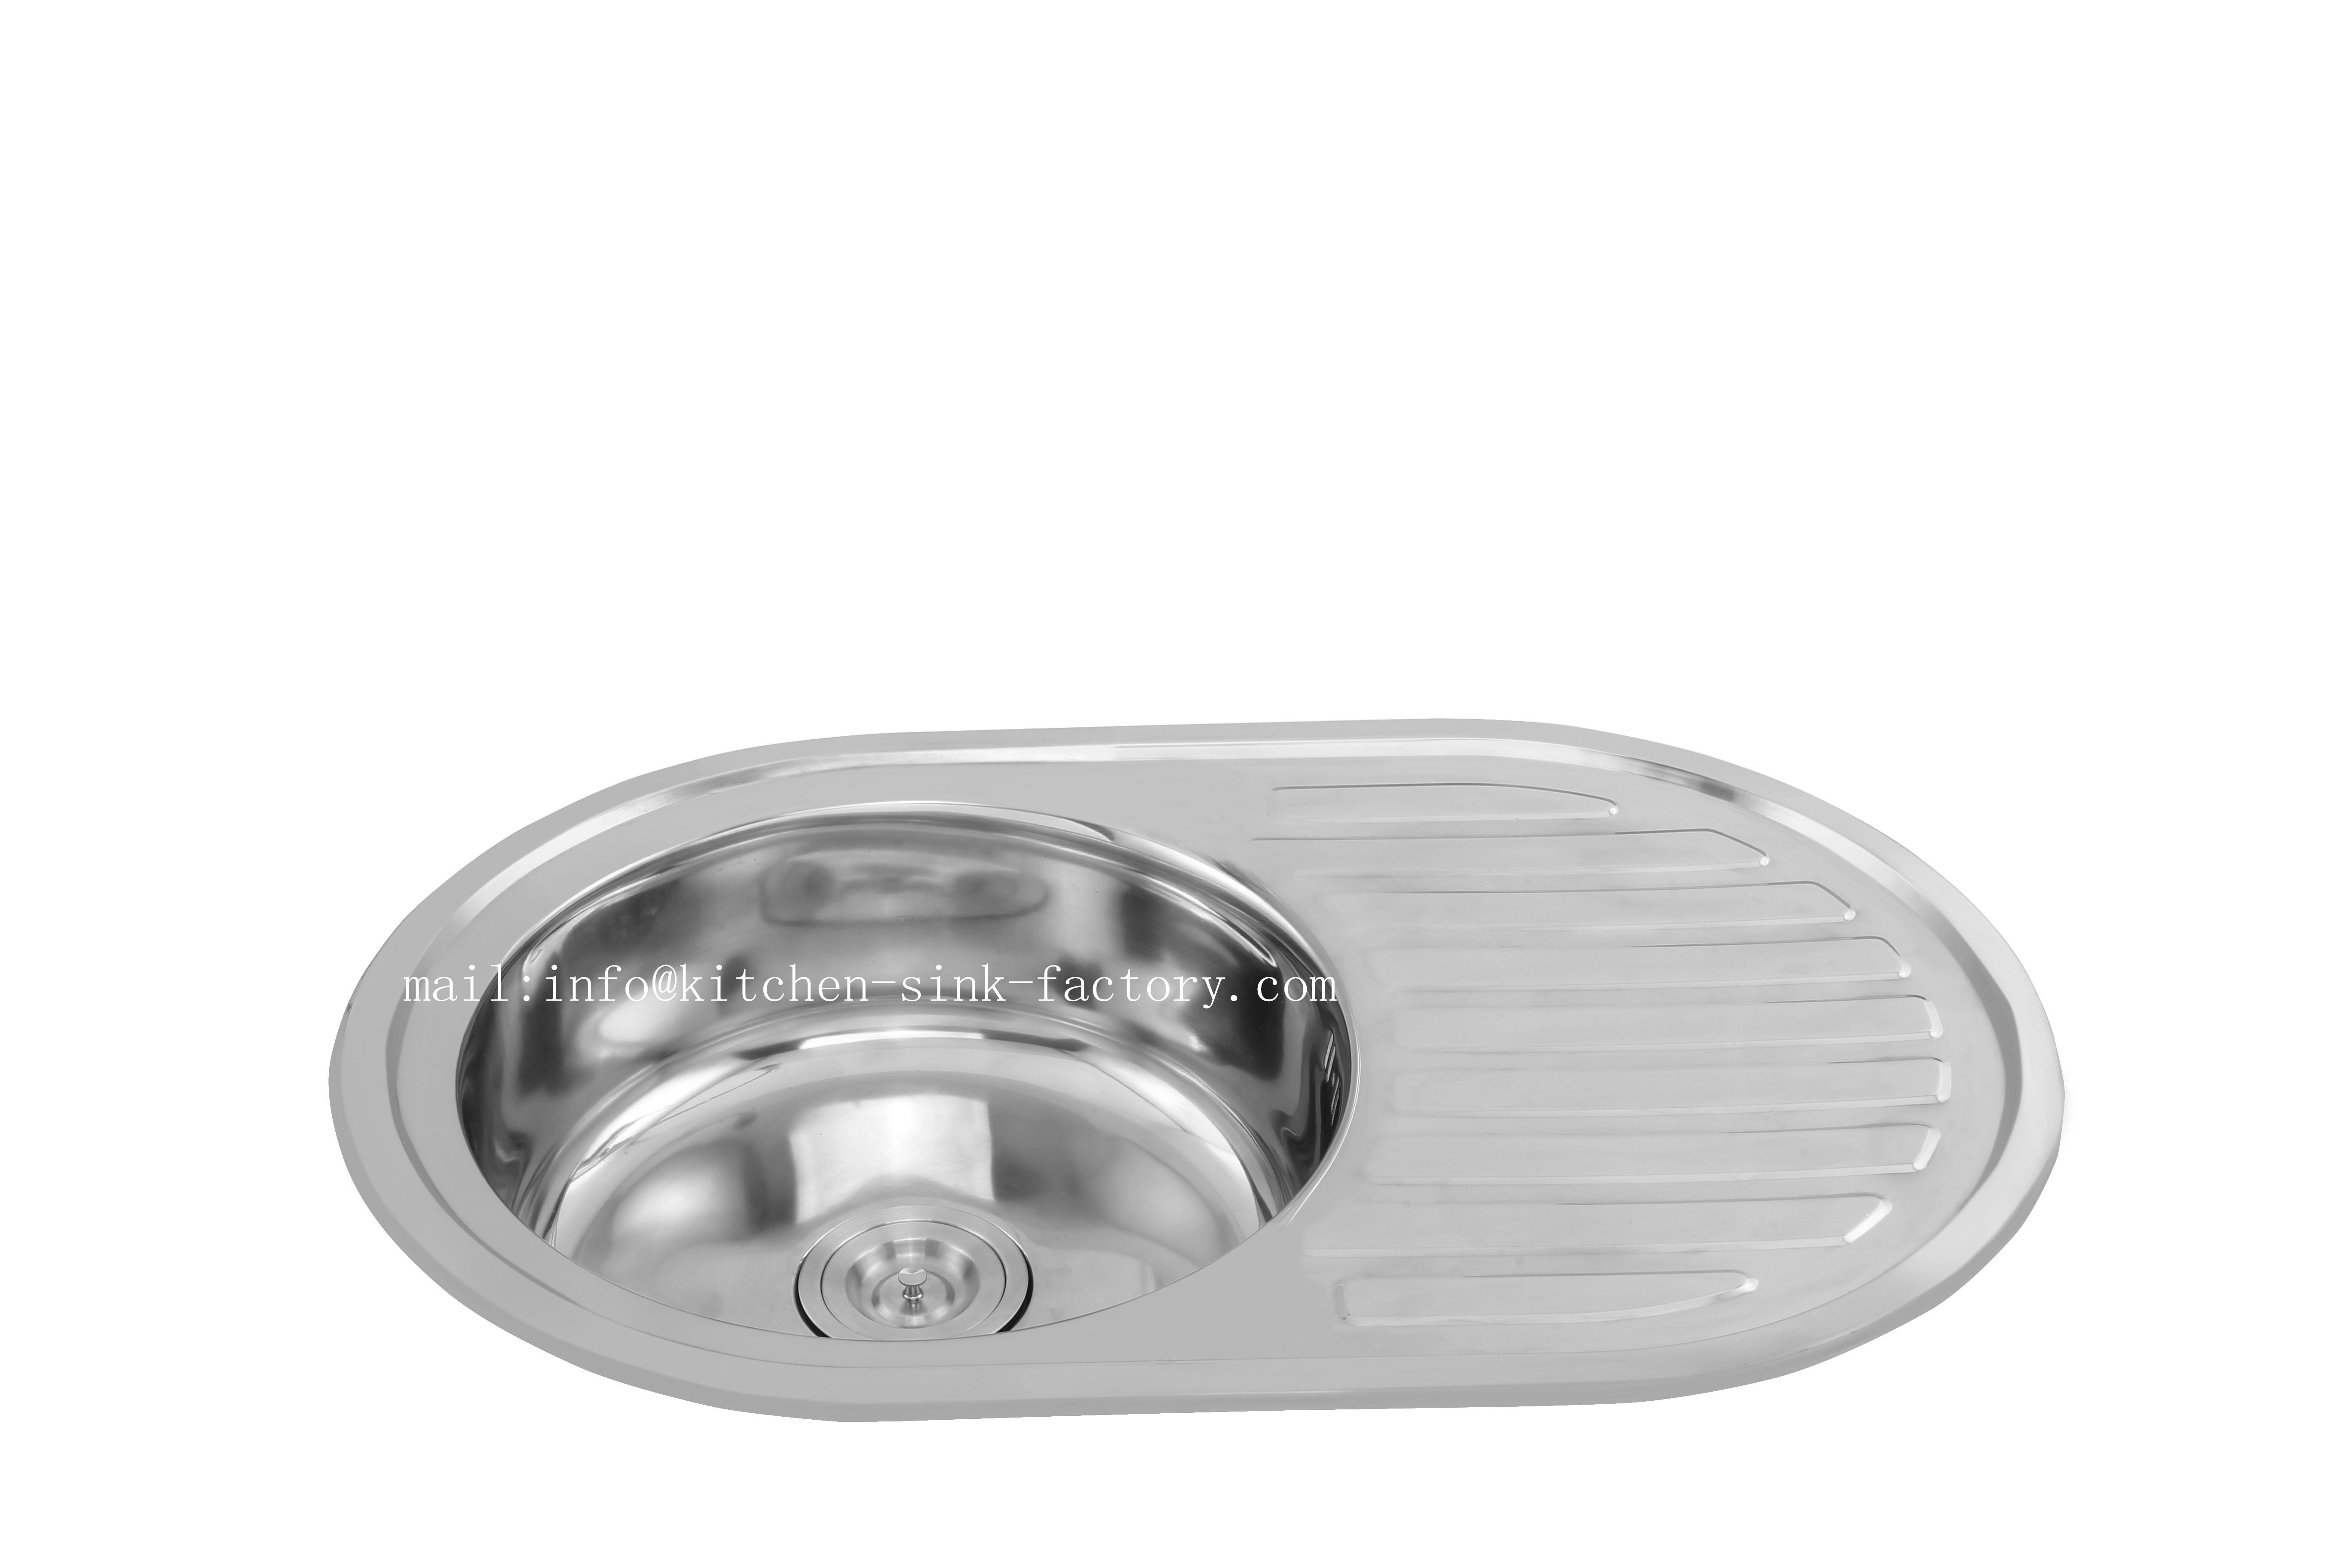 China Factory Suppy Stainless Steel Kitchen Sink WY-7750